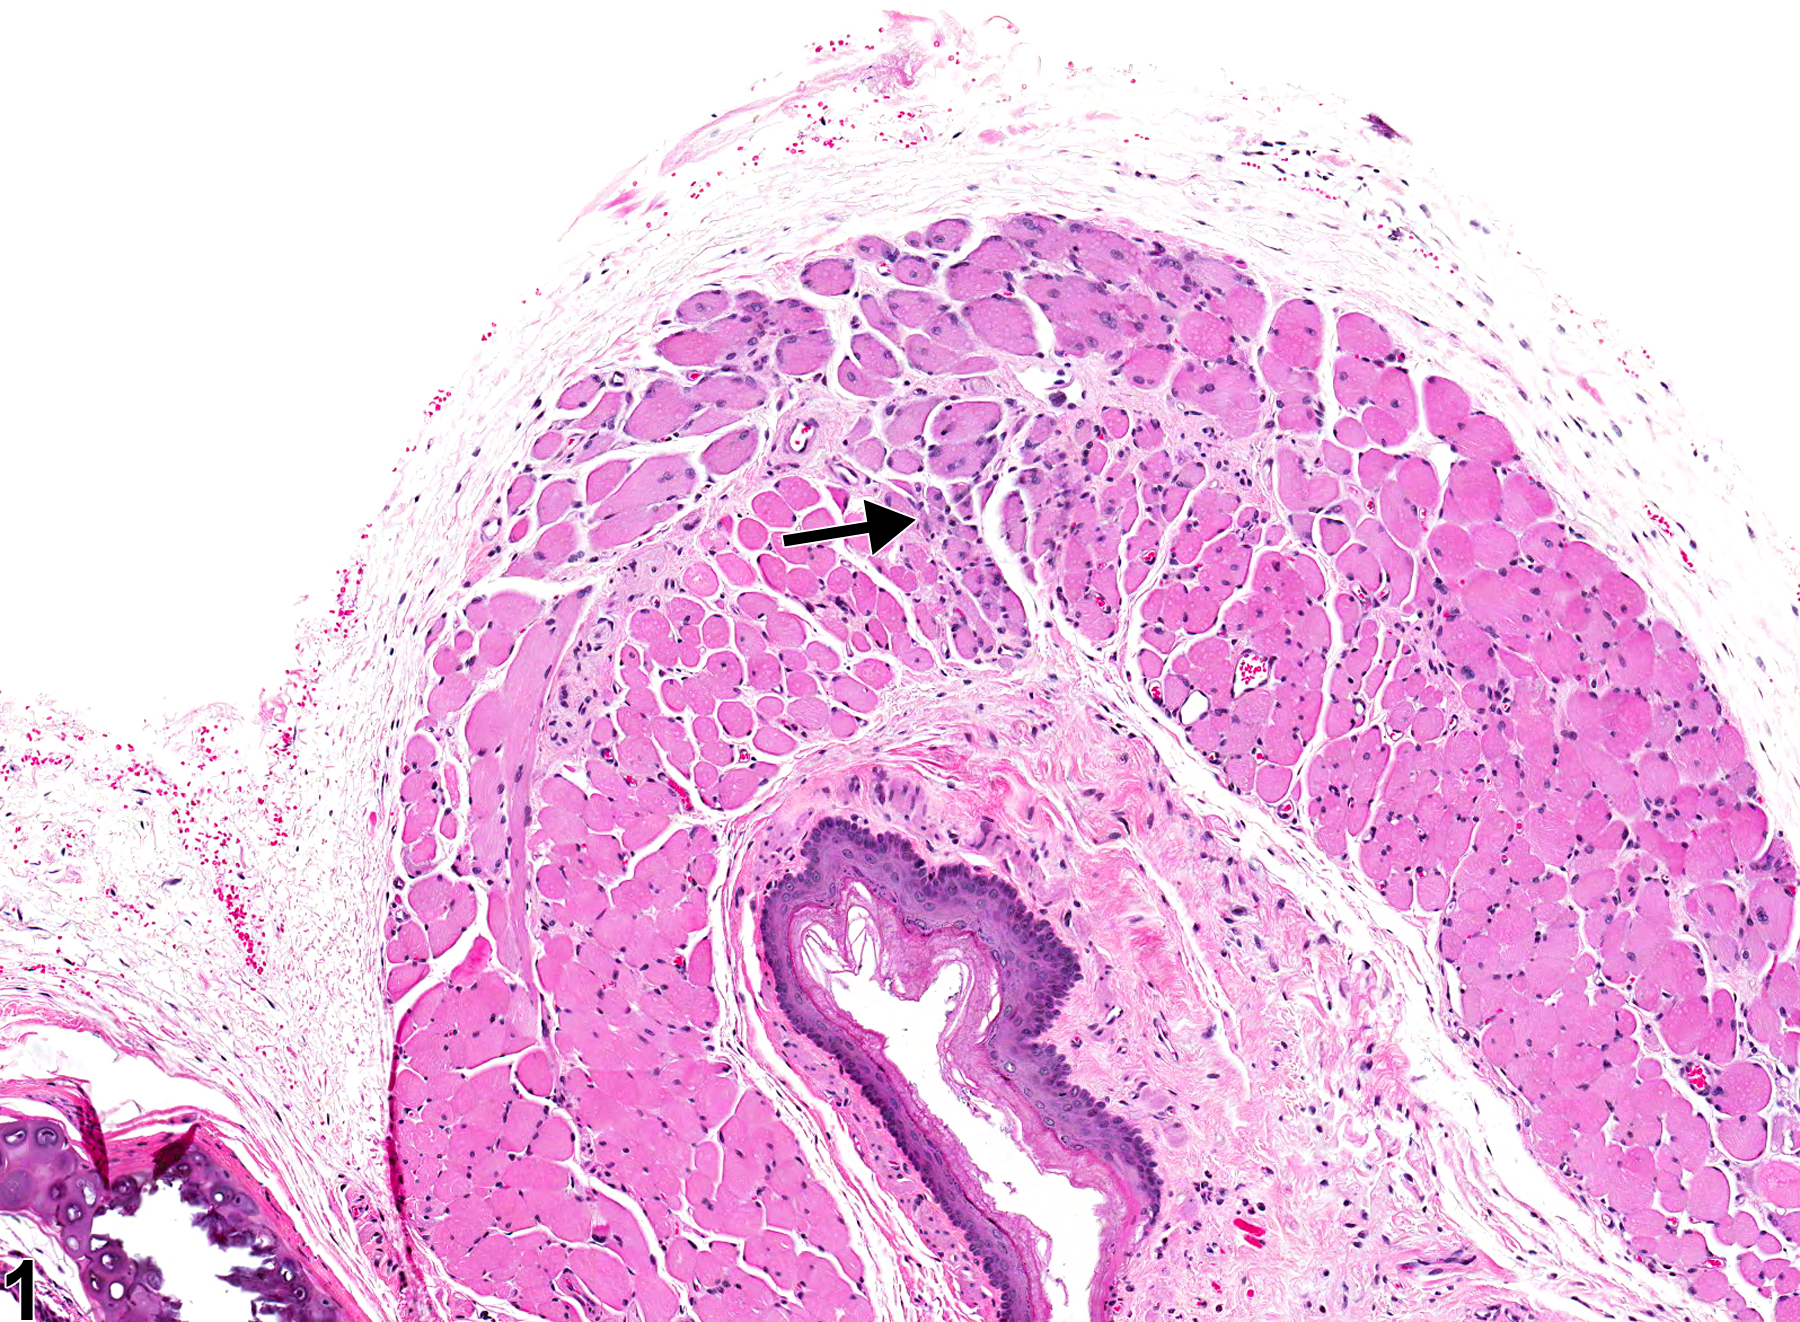 Image of degeneration in the esophagus muscularis from a male F344/N rat in a chronic study